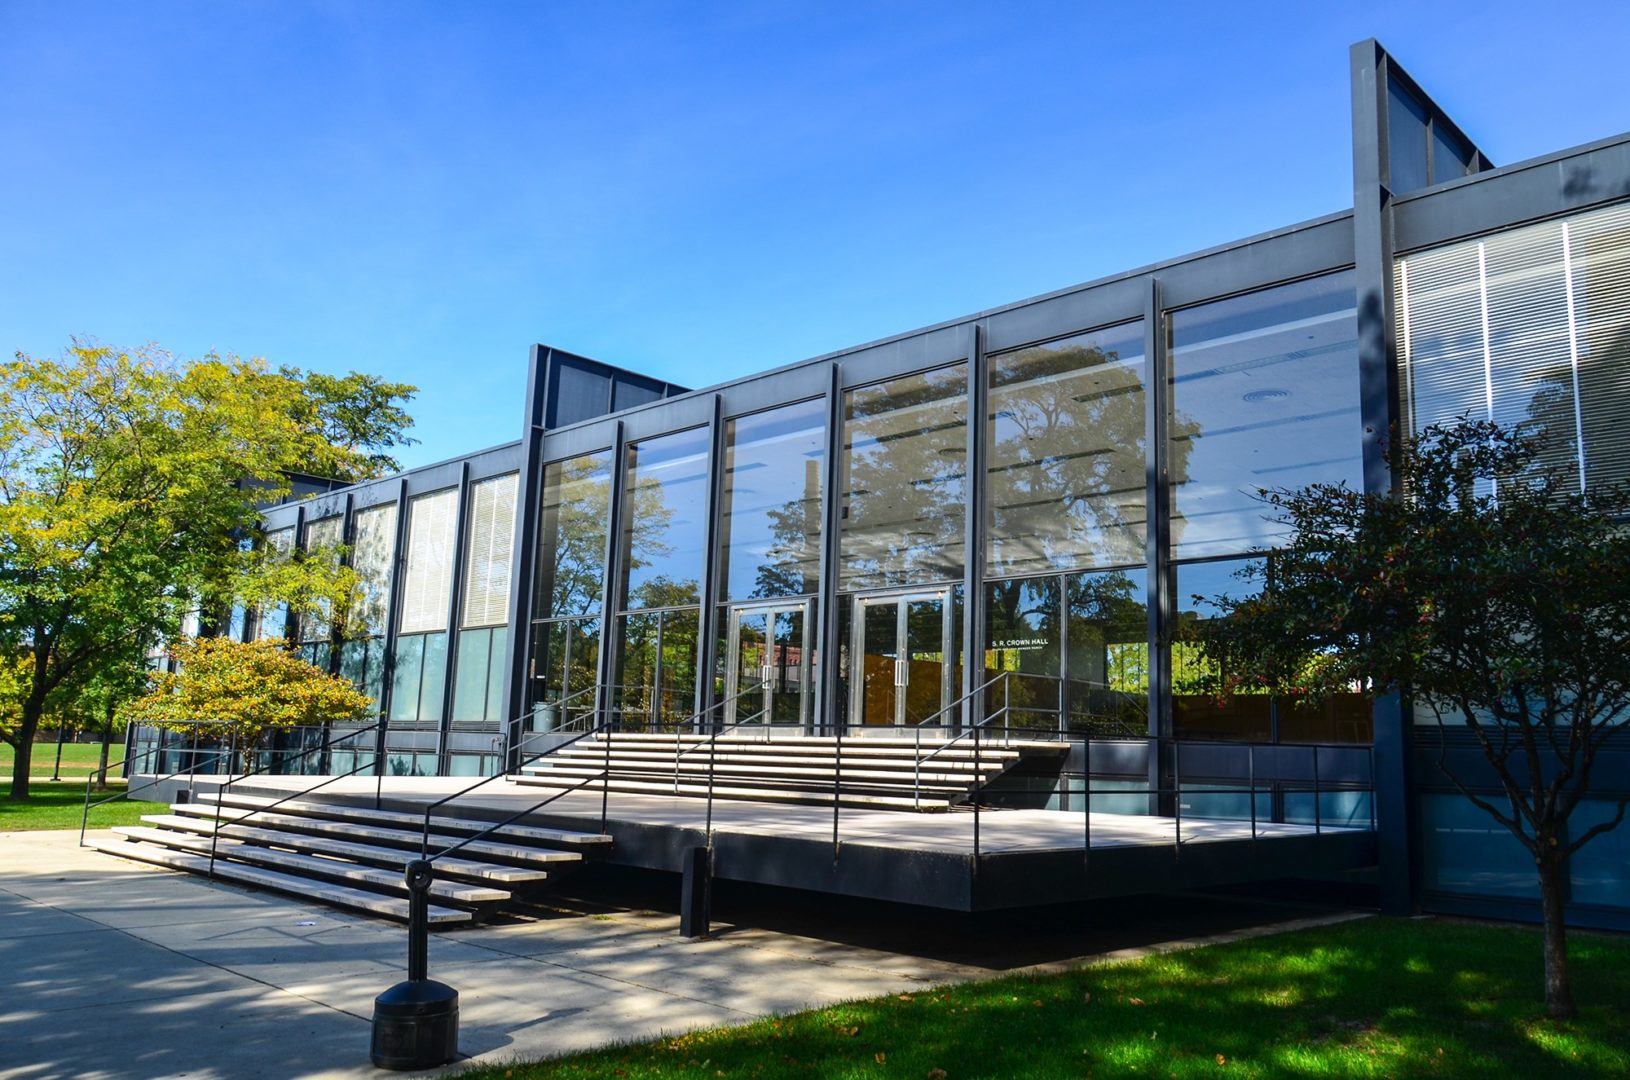 S. R. Crown Hall, home to Illinois Tech’s College of Architecture, is a National Historic Landmark—and is considered by many to be one of the iconic buildings designed by legendary architect Ludwig Mies van der Rohe.